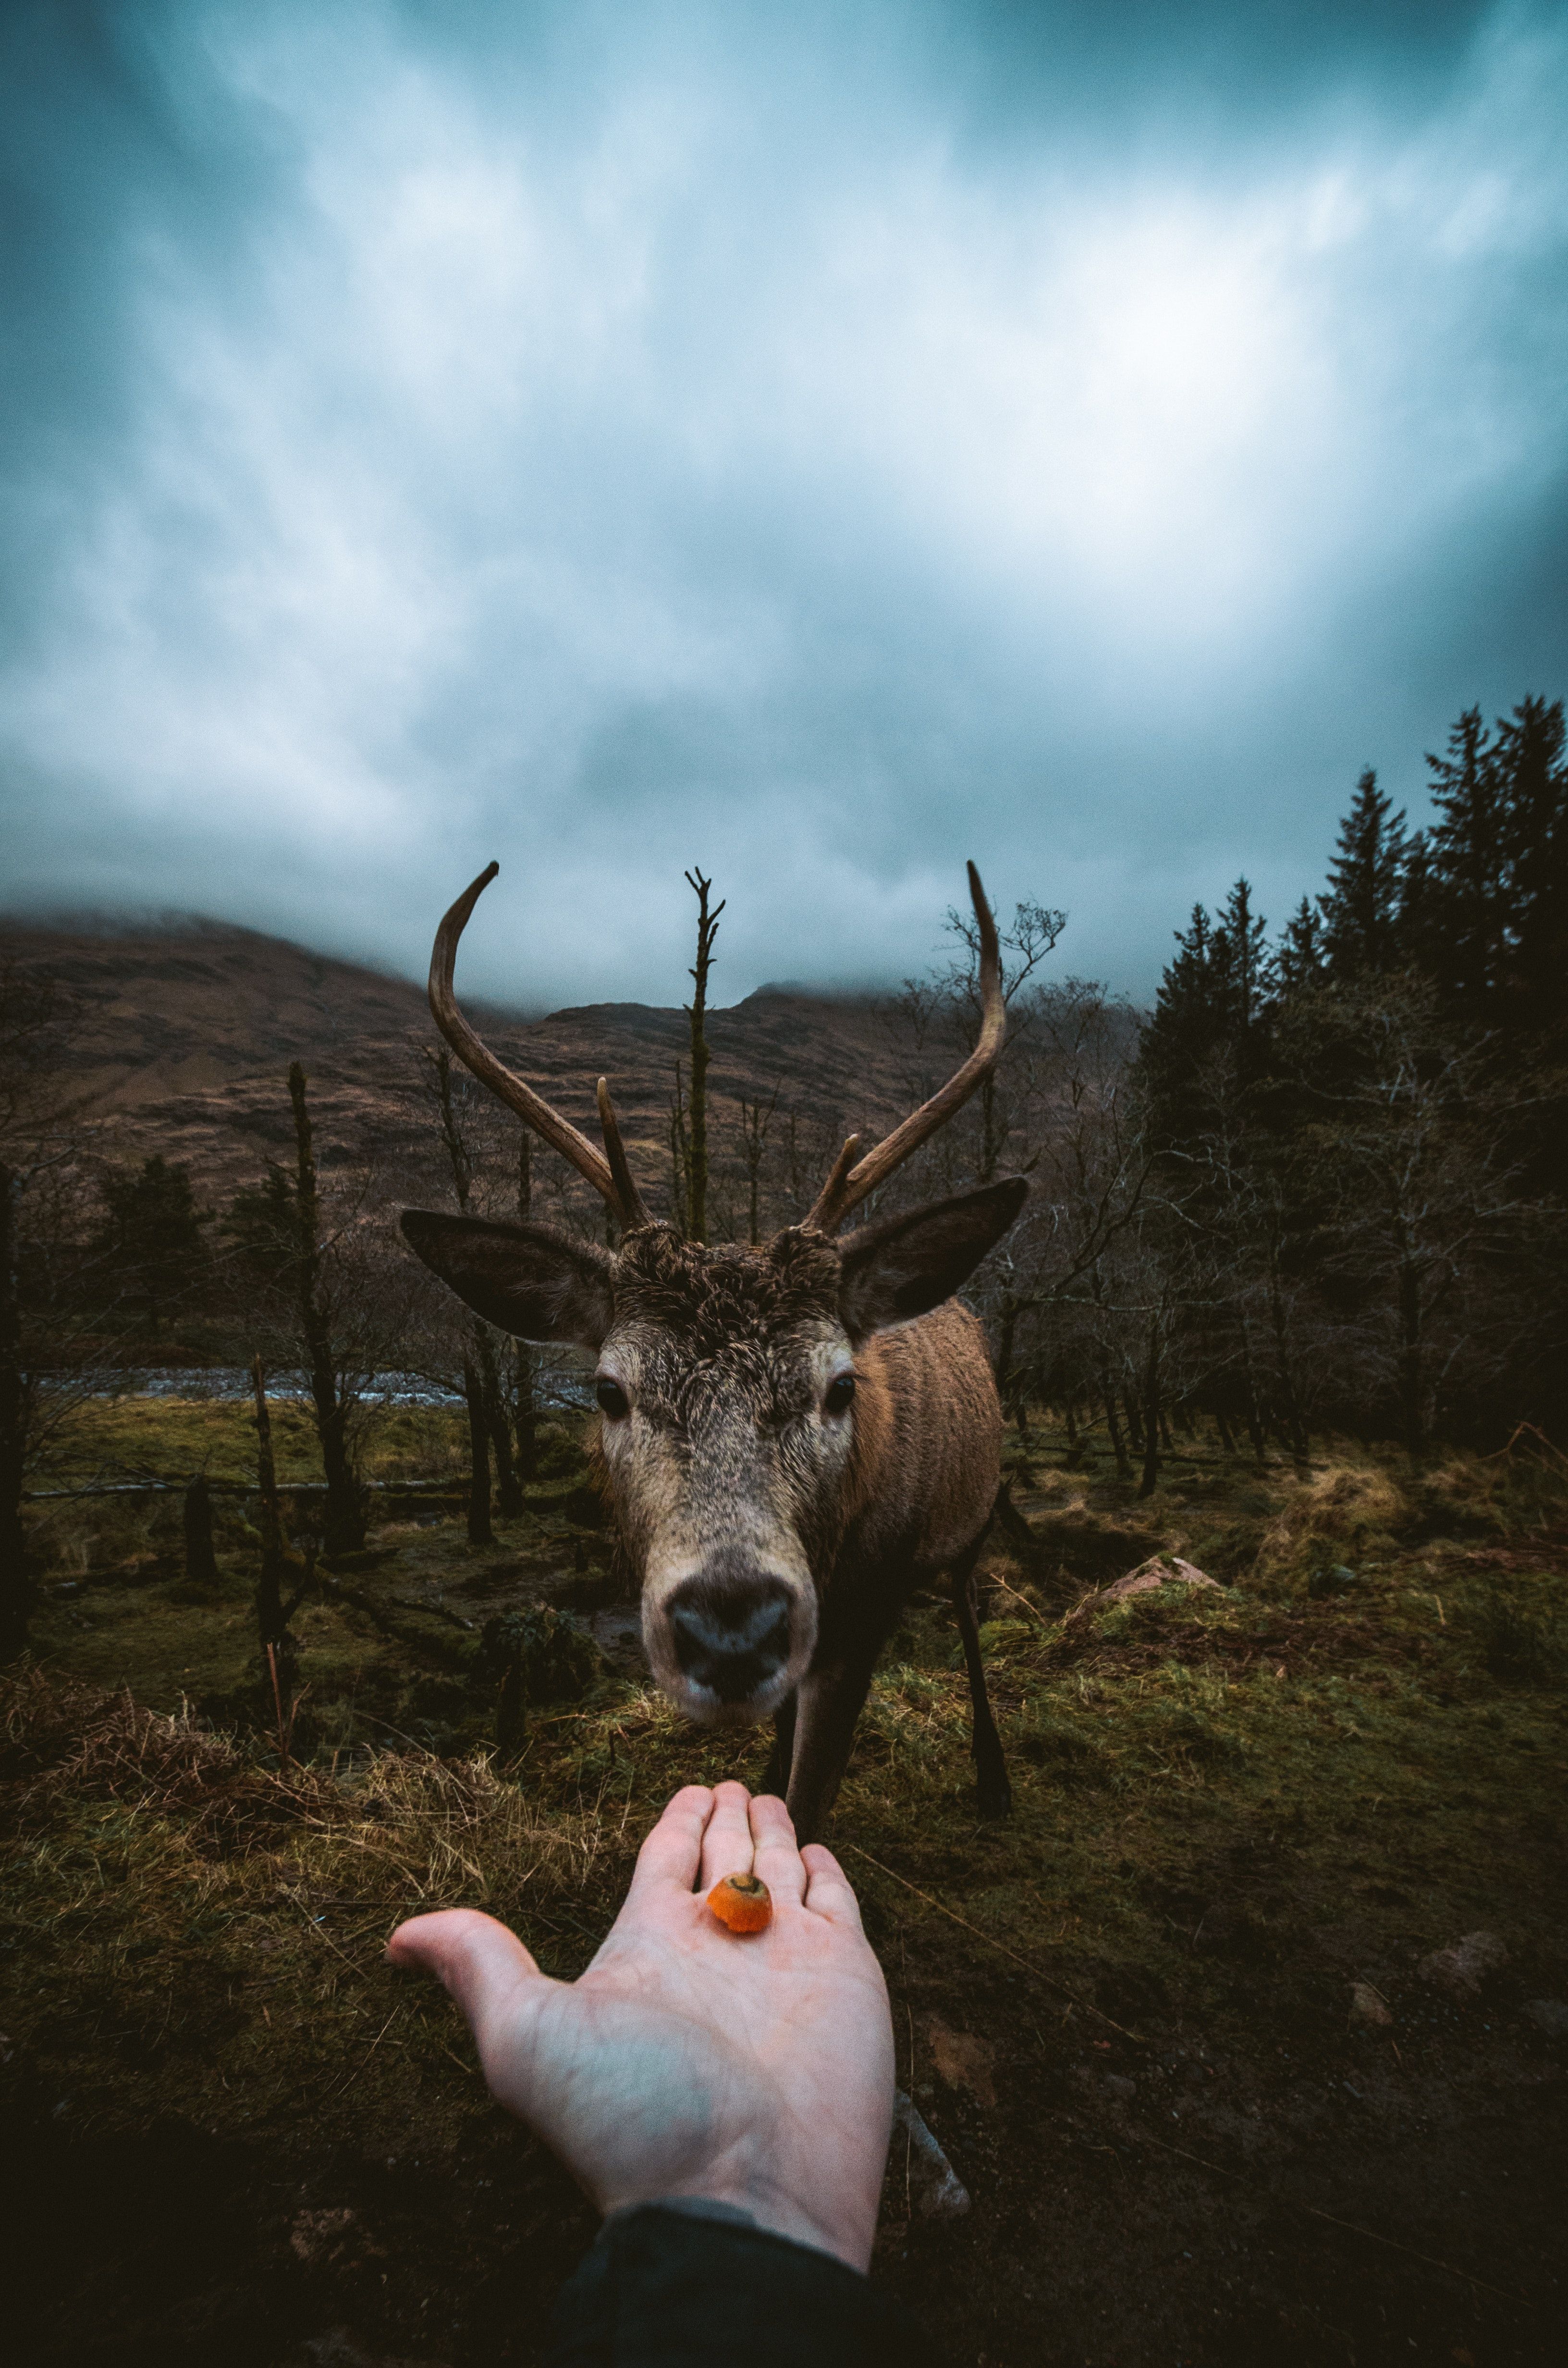 A hand holding out a piece of fruit to a deer in a forest. - Deer